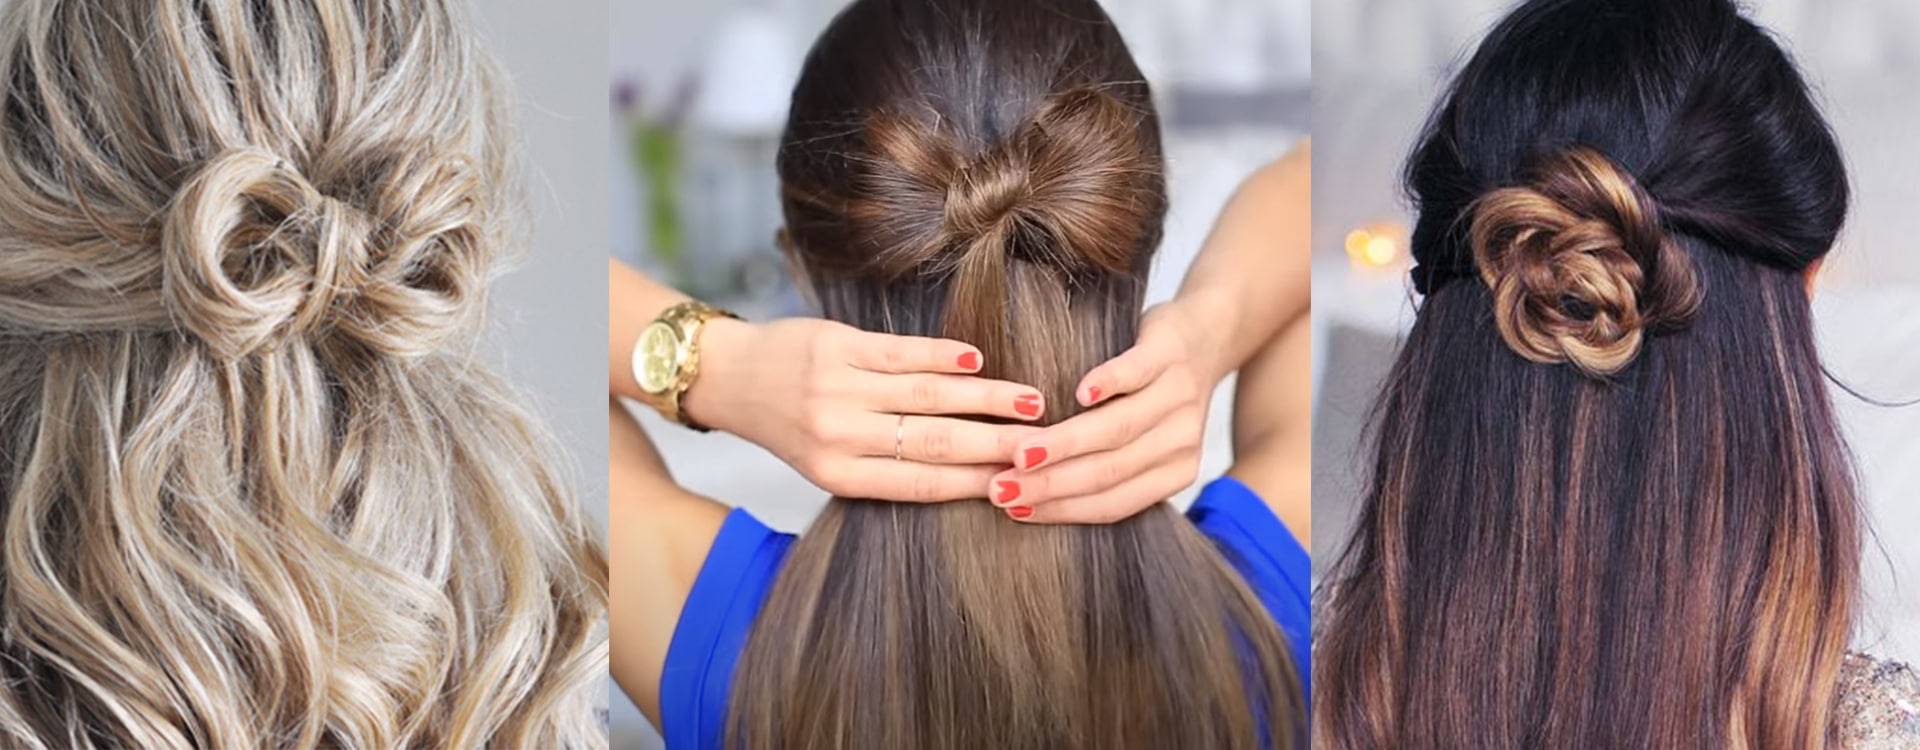 How to Do a Bow in Your Hair